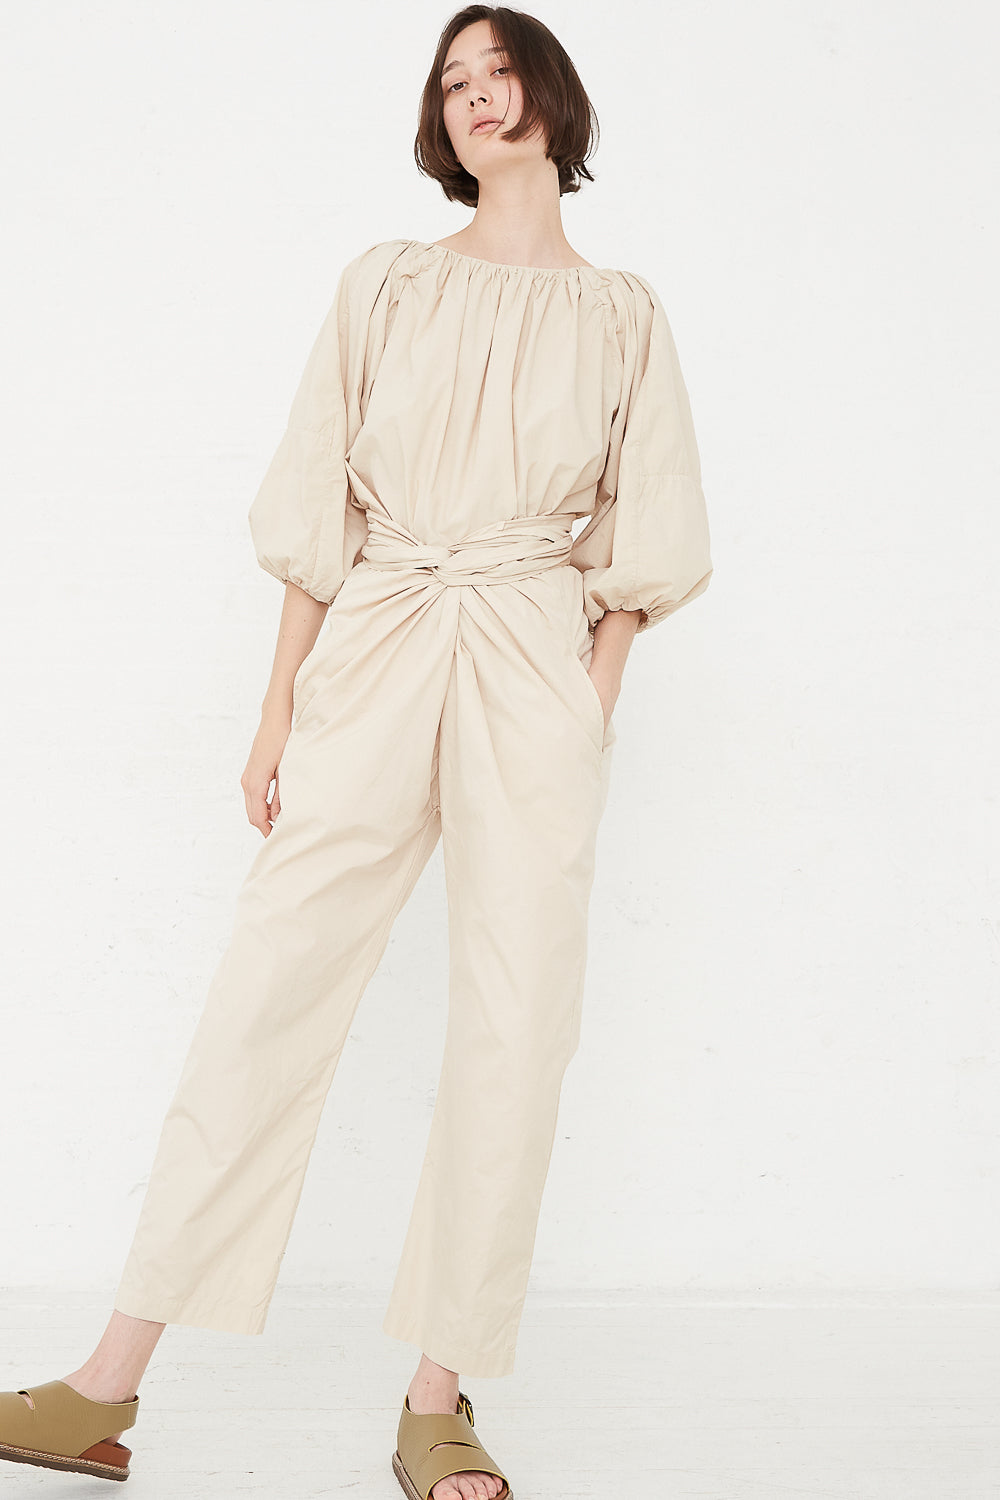 Cosmic Wonder - Suvin Cotton Broadcloth Wrap Pant in Beeswax front view